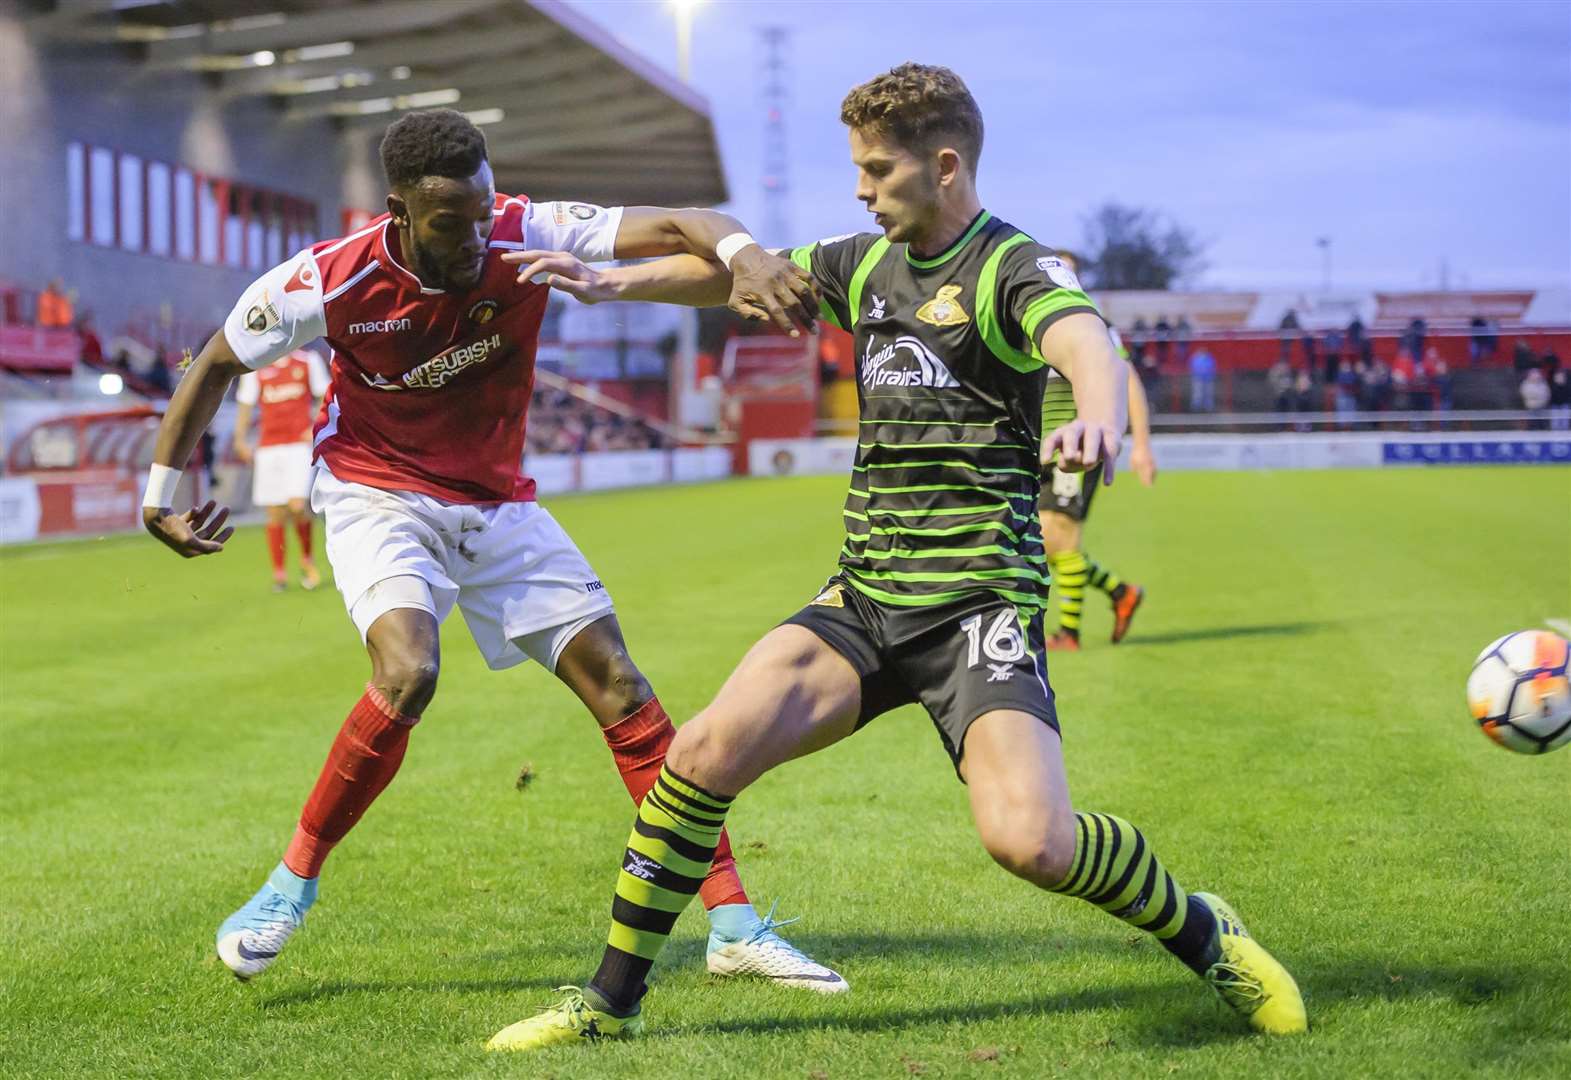 Former Gills loanee Jordan Houghton in action for Doncaster at Ebbsfleet United in the FA Cup Picture: Andy Payton